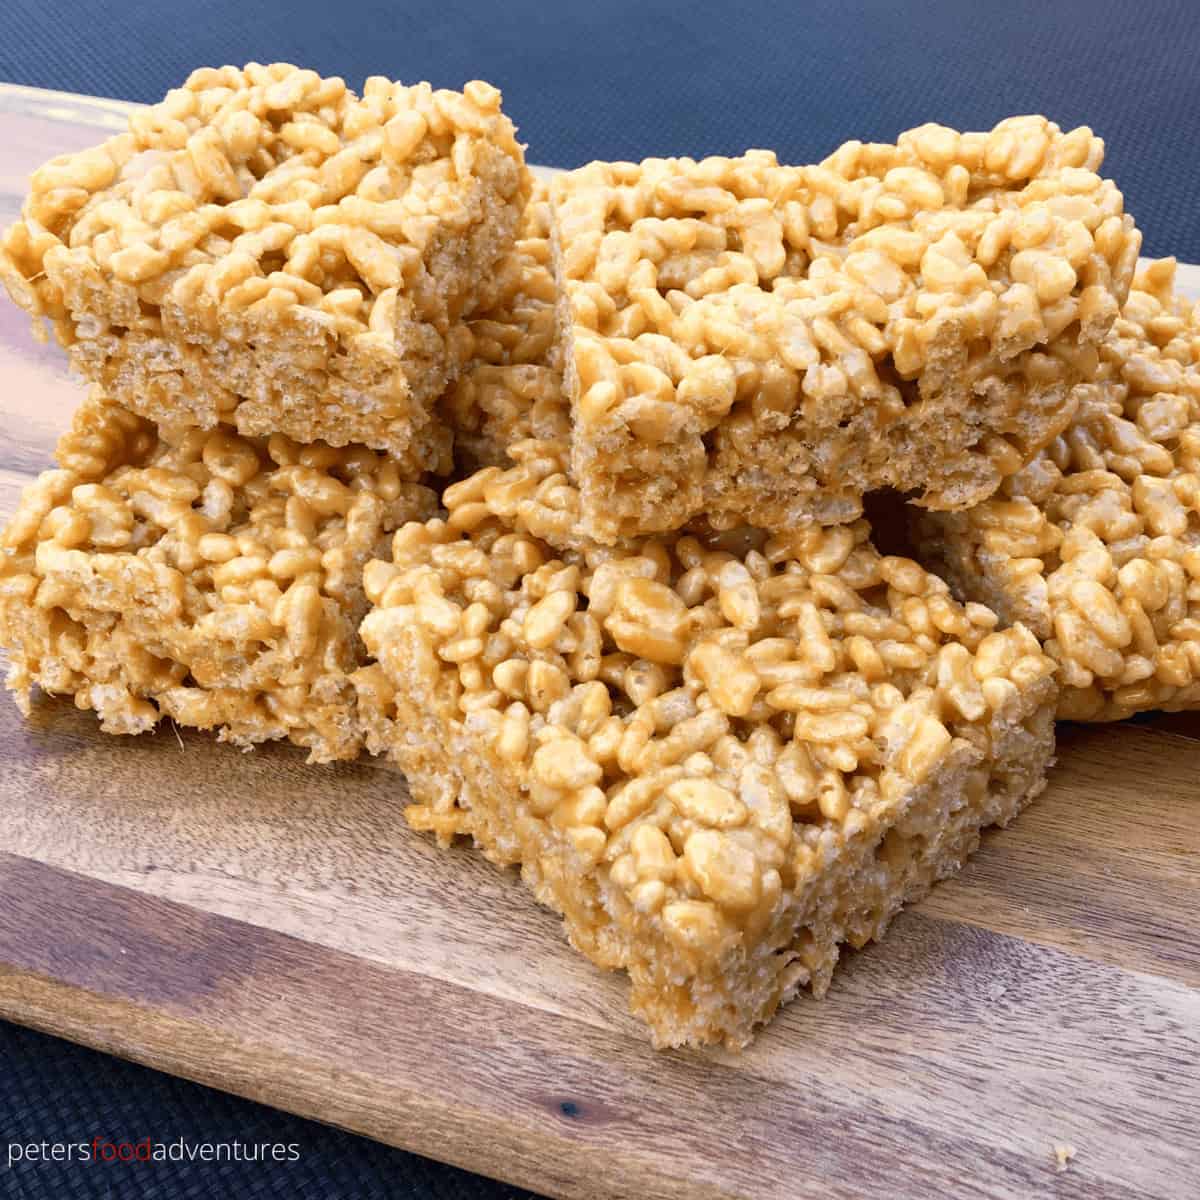 Caramel Rice Krispies is a nostalgic treat from the good old days. A gooey caramel treat, recipe found on the back of an old cereal box! Easy and delicious, just like the original! Caramel Rice Krispies Squares